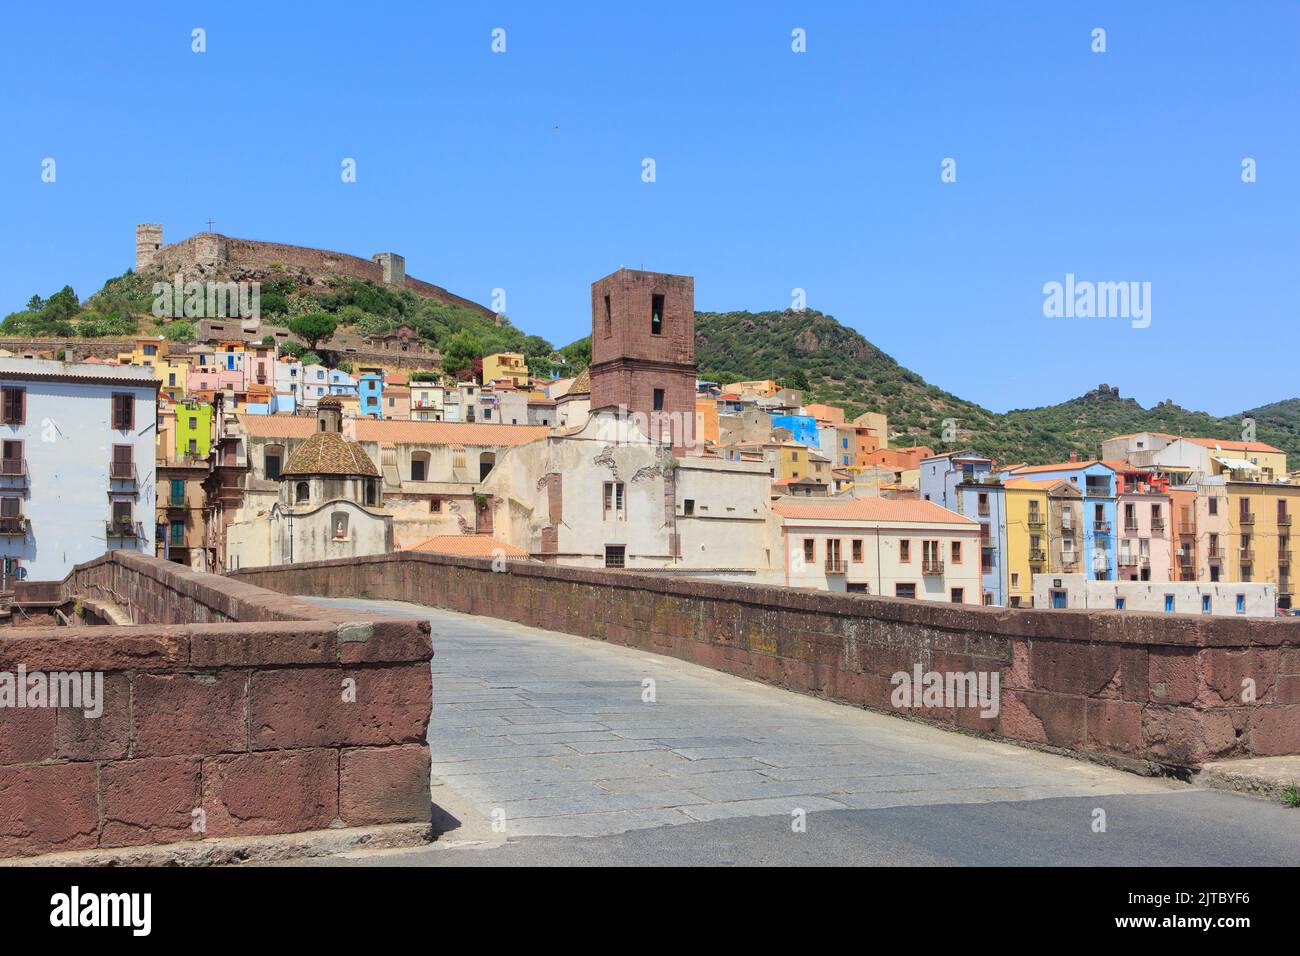 View from the Old Bridge at the campanile of Bosa cathedral and the 12th-century Castle of Serravalle in Bosa on the island of Sardinia, Italy Stock Photo